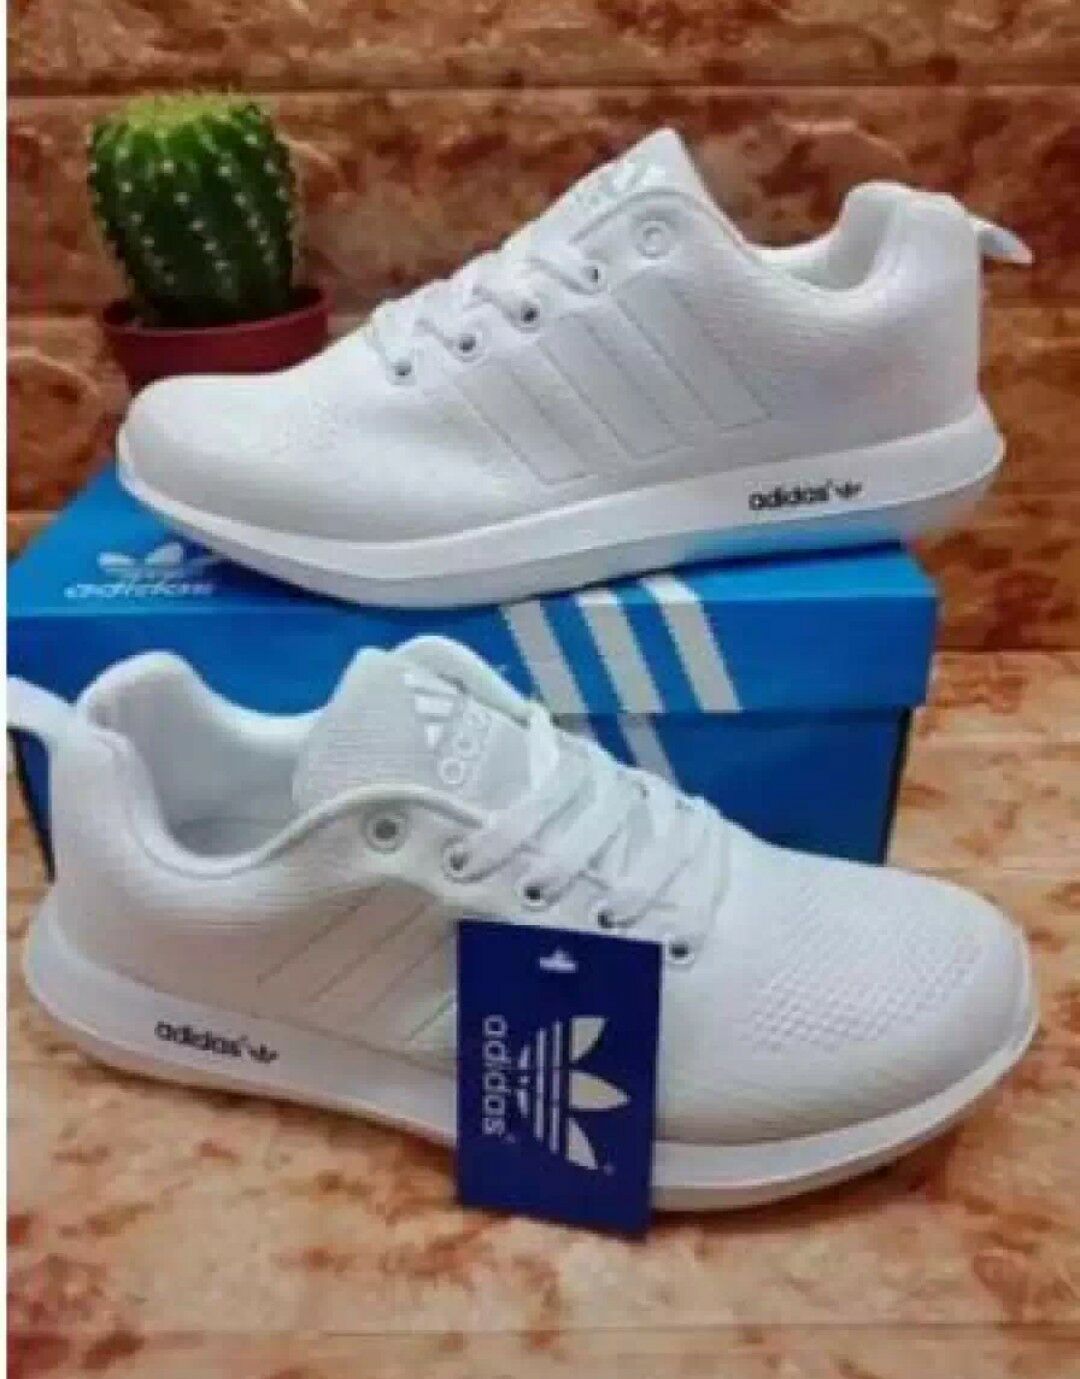 white adidas trainers with green stripes